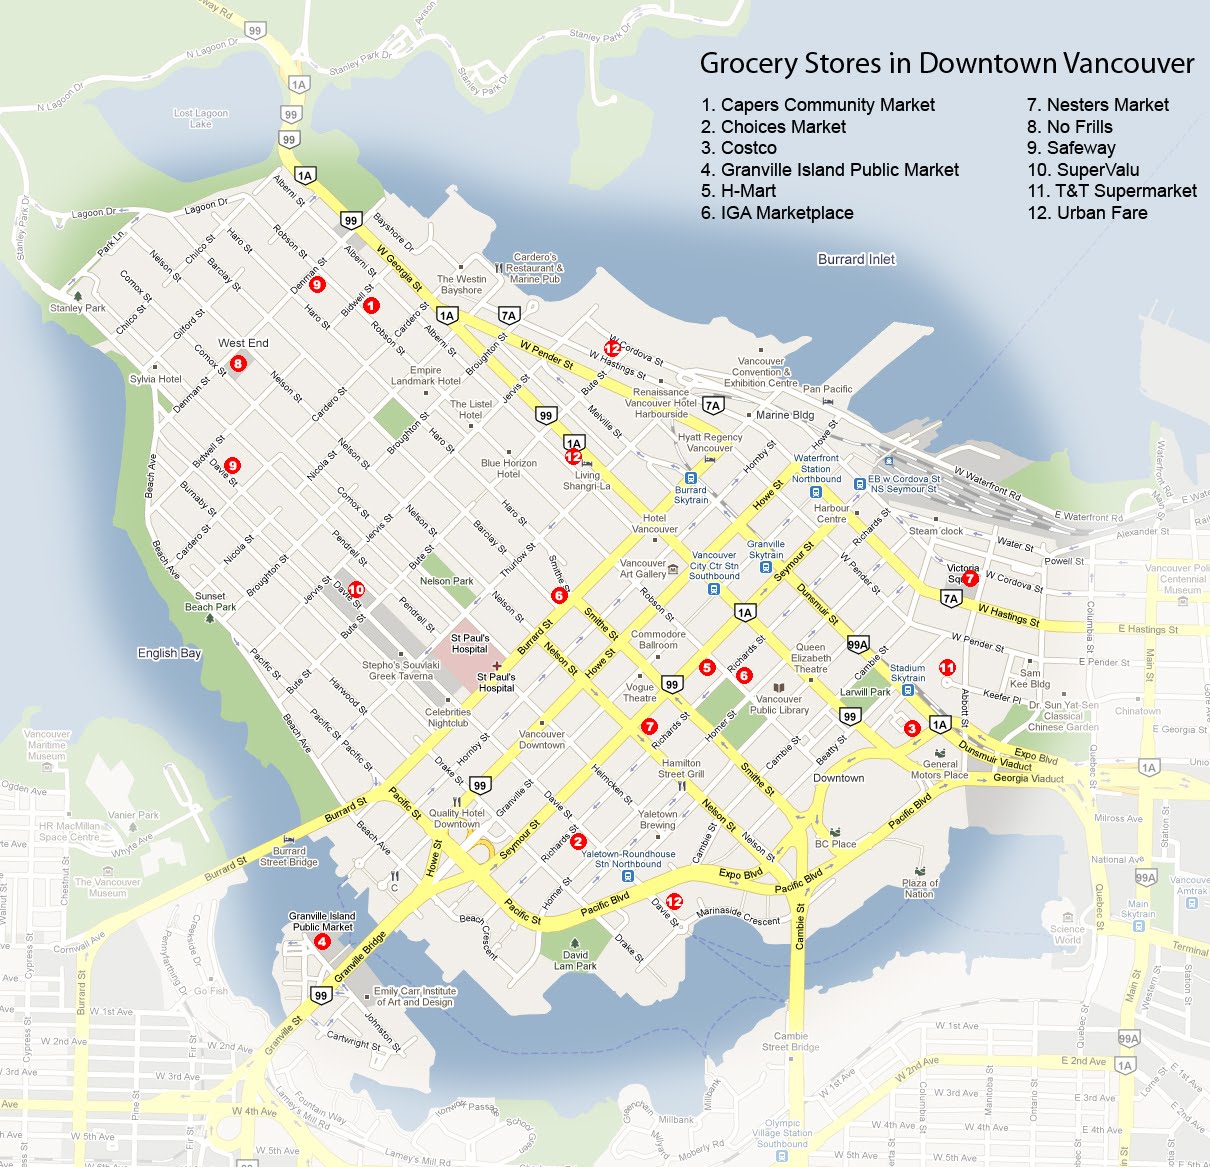 Grocery Stores of downtown Vancouver